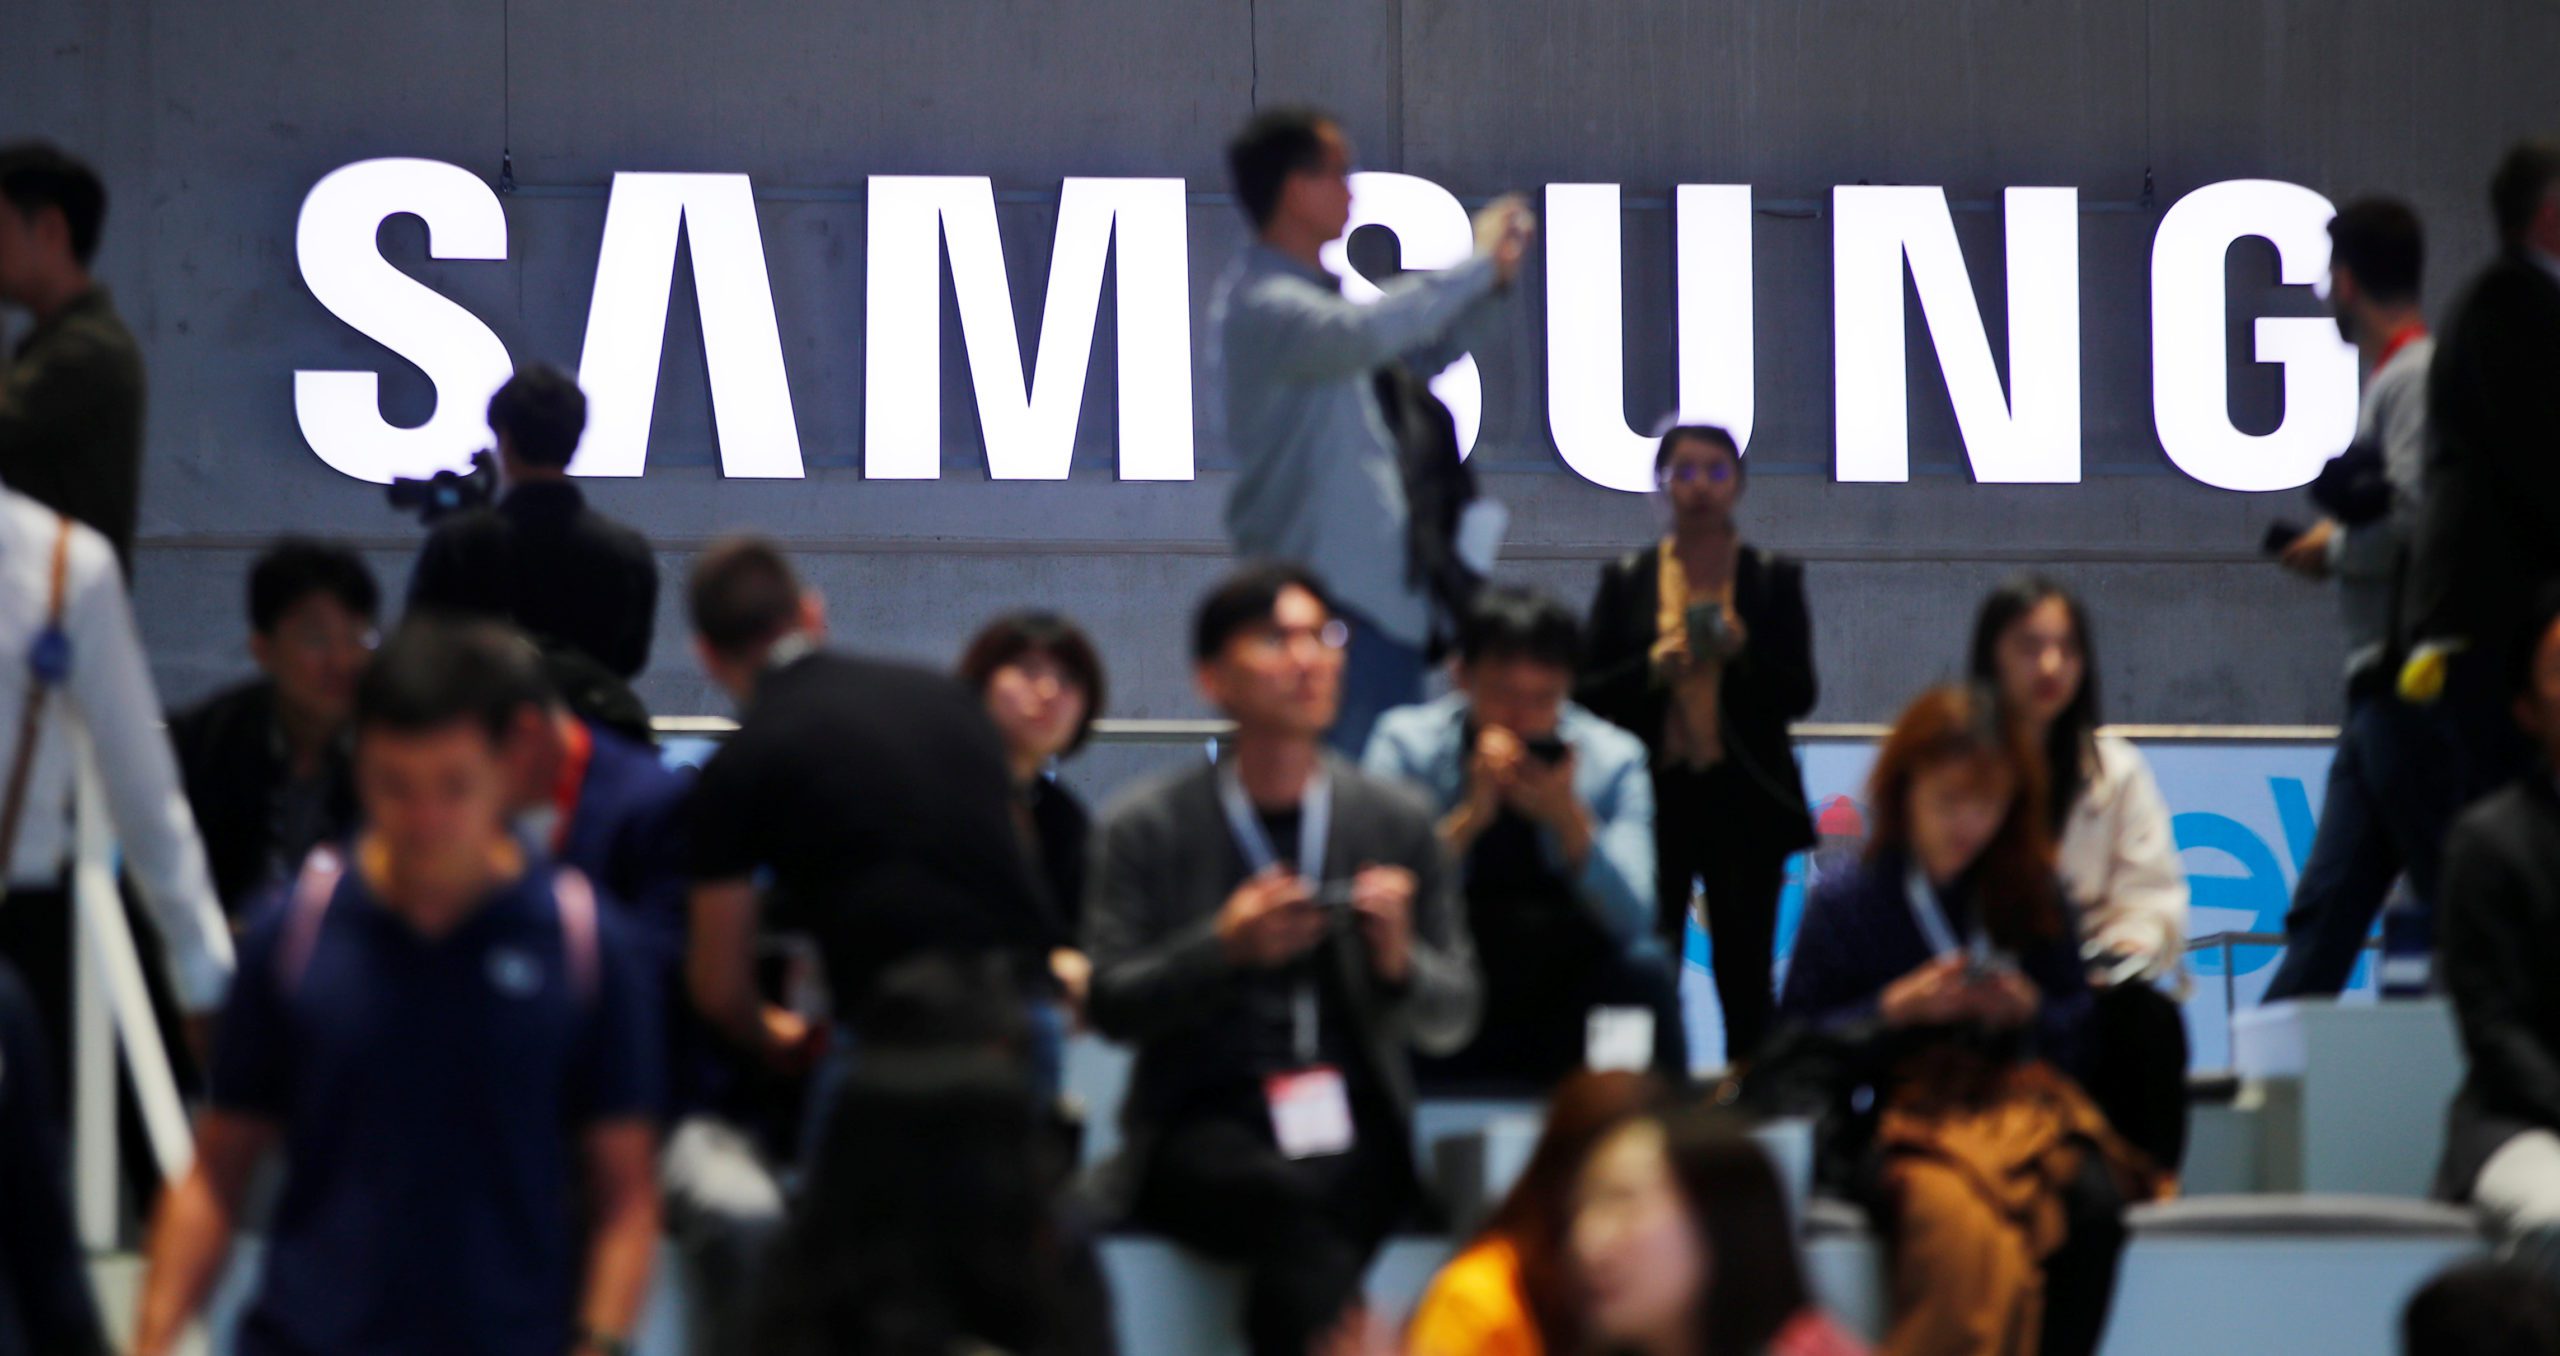 People sit in front of a Samsung logo at the IFA consumer tech fair in Berlin, Germany, September 6, 2019. REUTERS/Hannibal Hanschke - RC1D220499C0